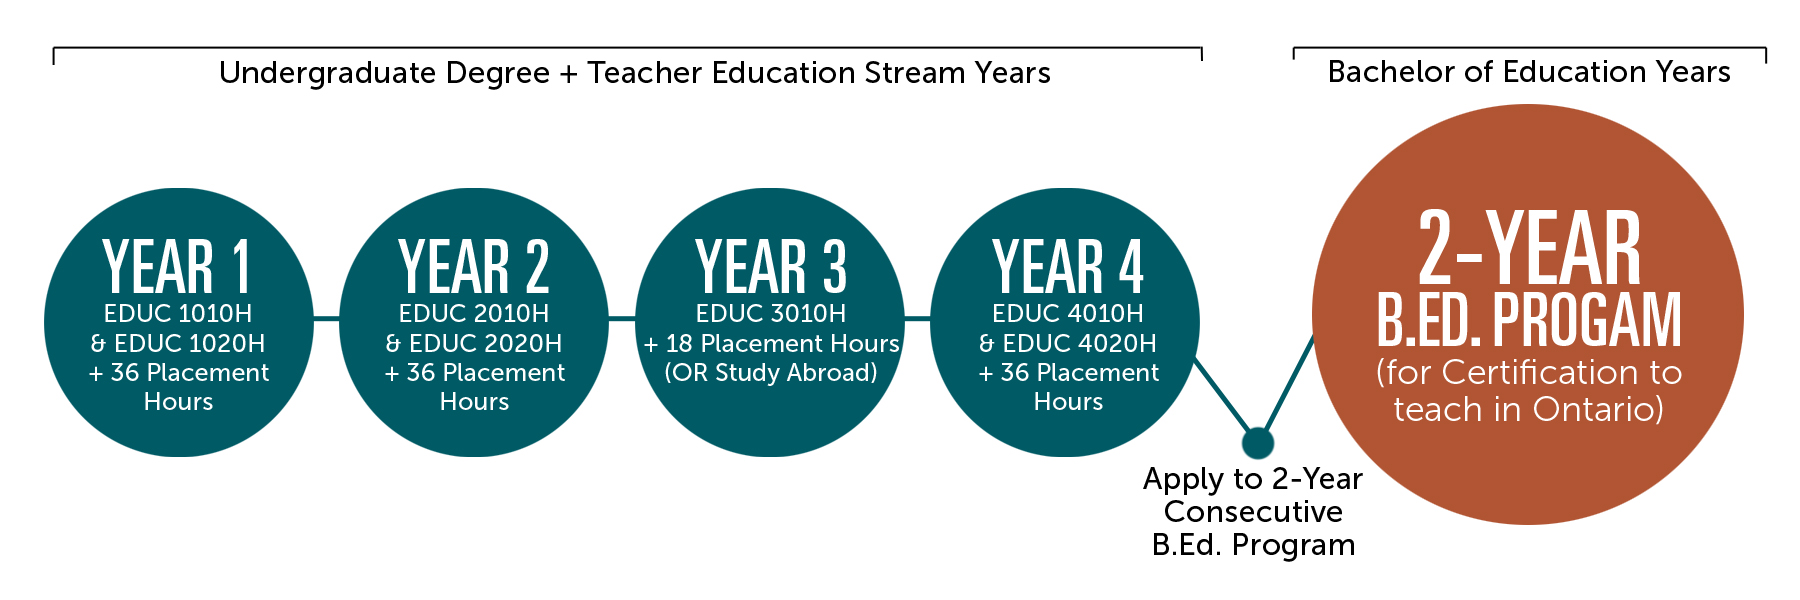 timeline graphic of 4 undergraduate plus teacher education stream years then apply to 2 year B Ed degree